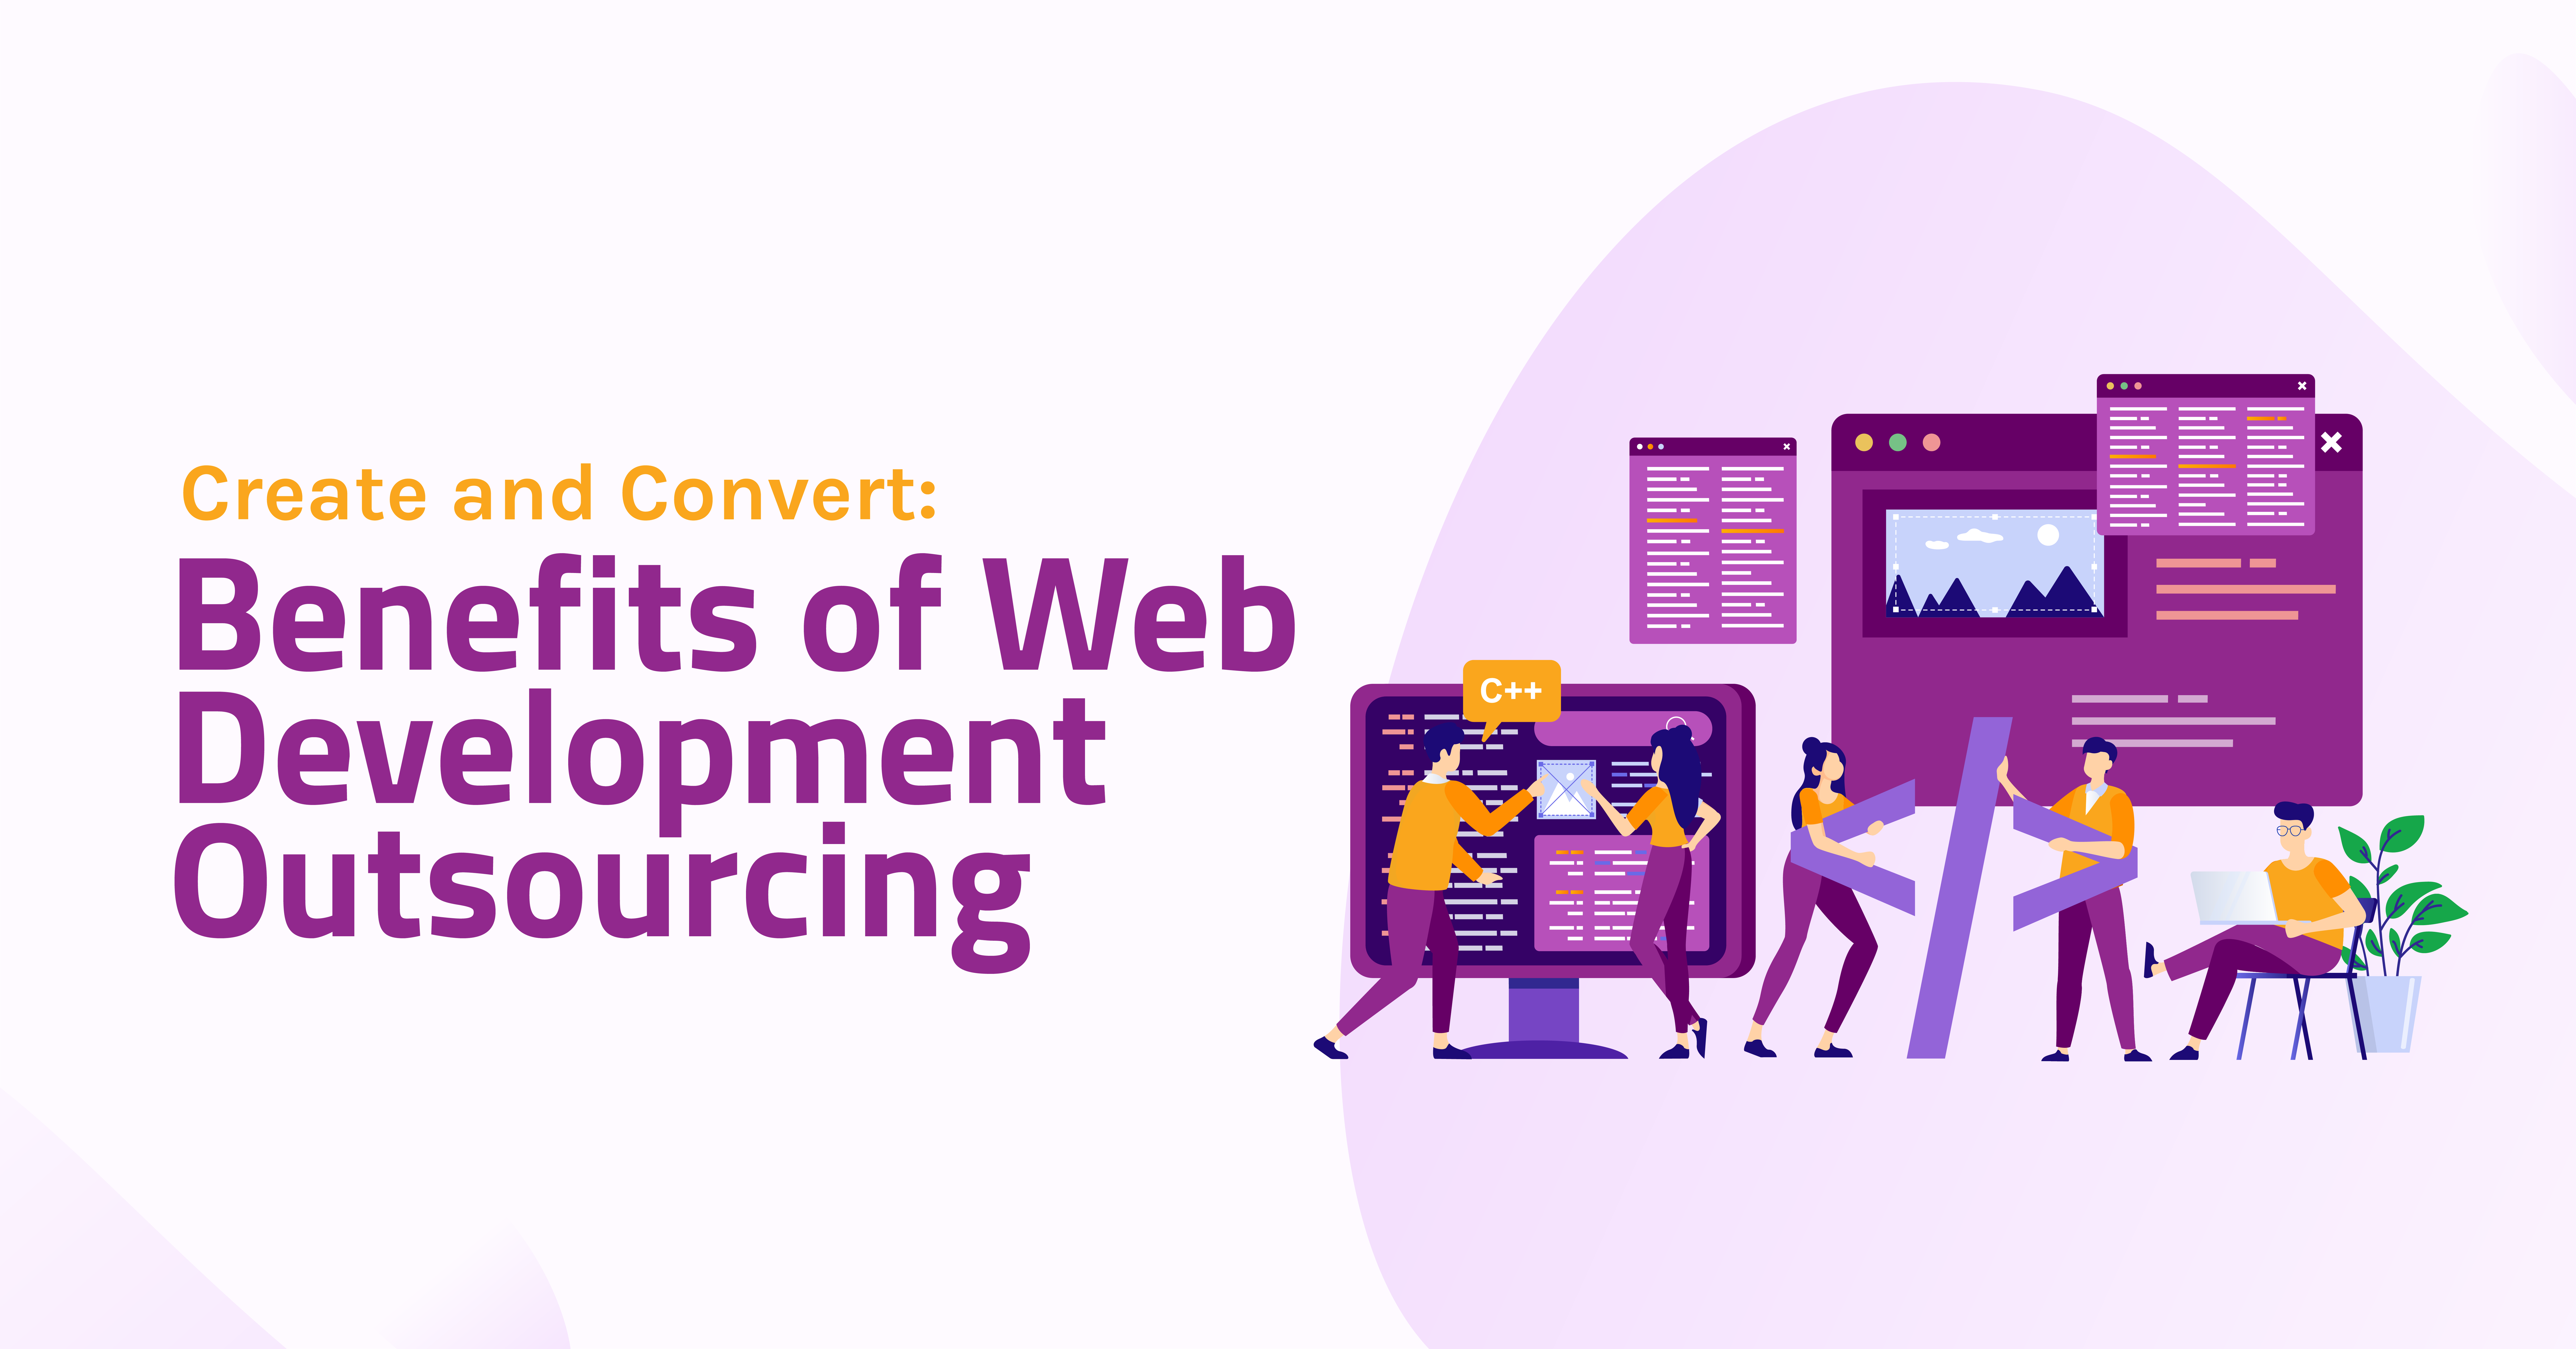 Create and Convert: Benefits of Web Development Outsourcing